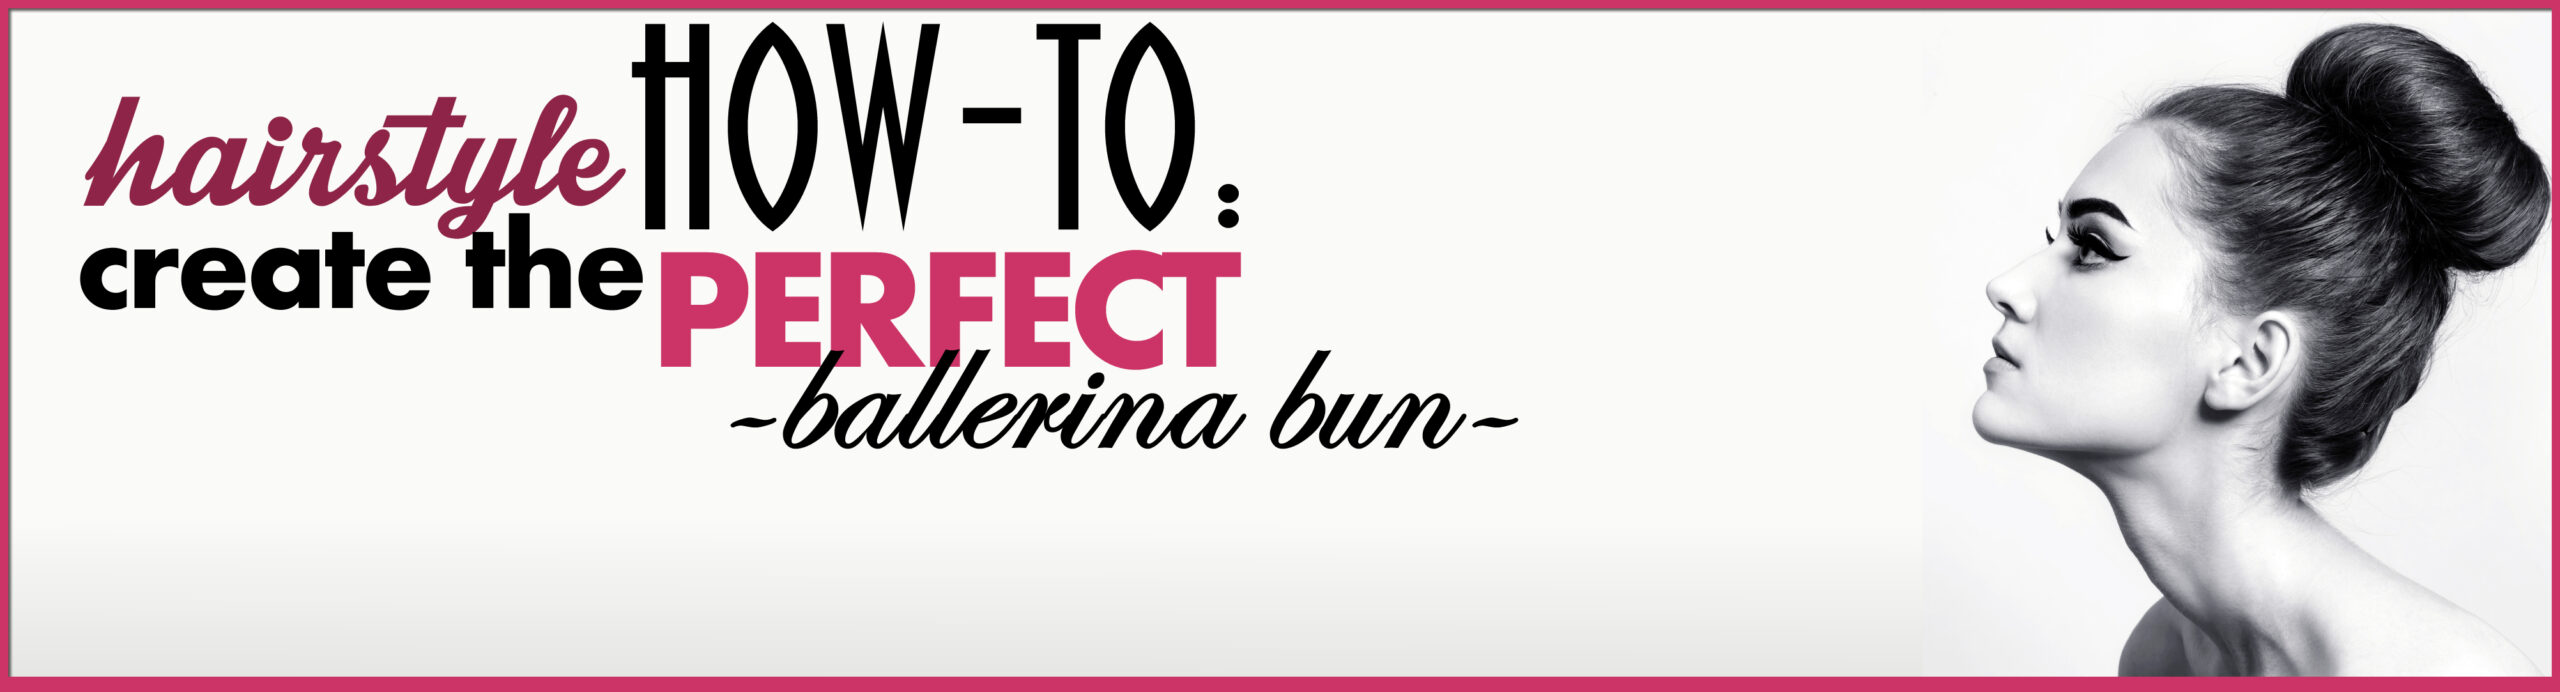 Hairstyle How To Create the Perfect Ballerina Bun Feature